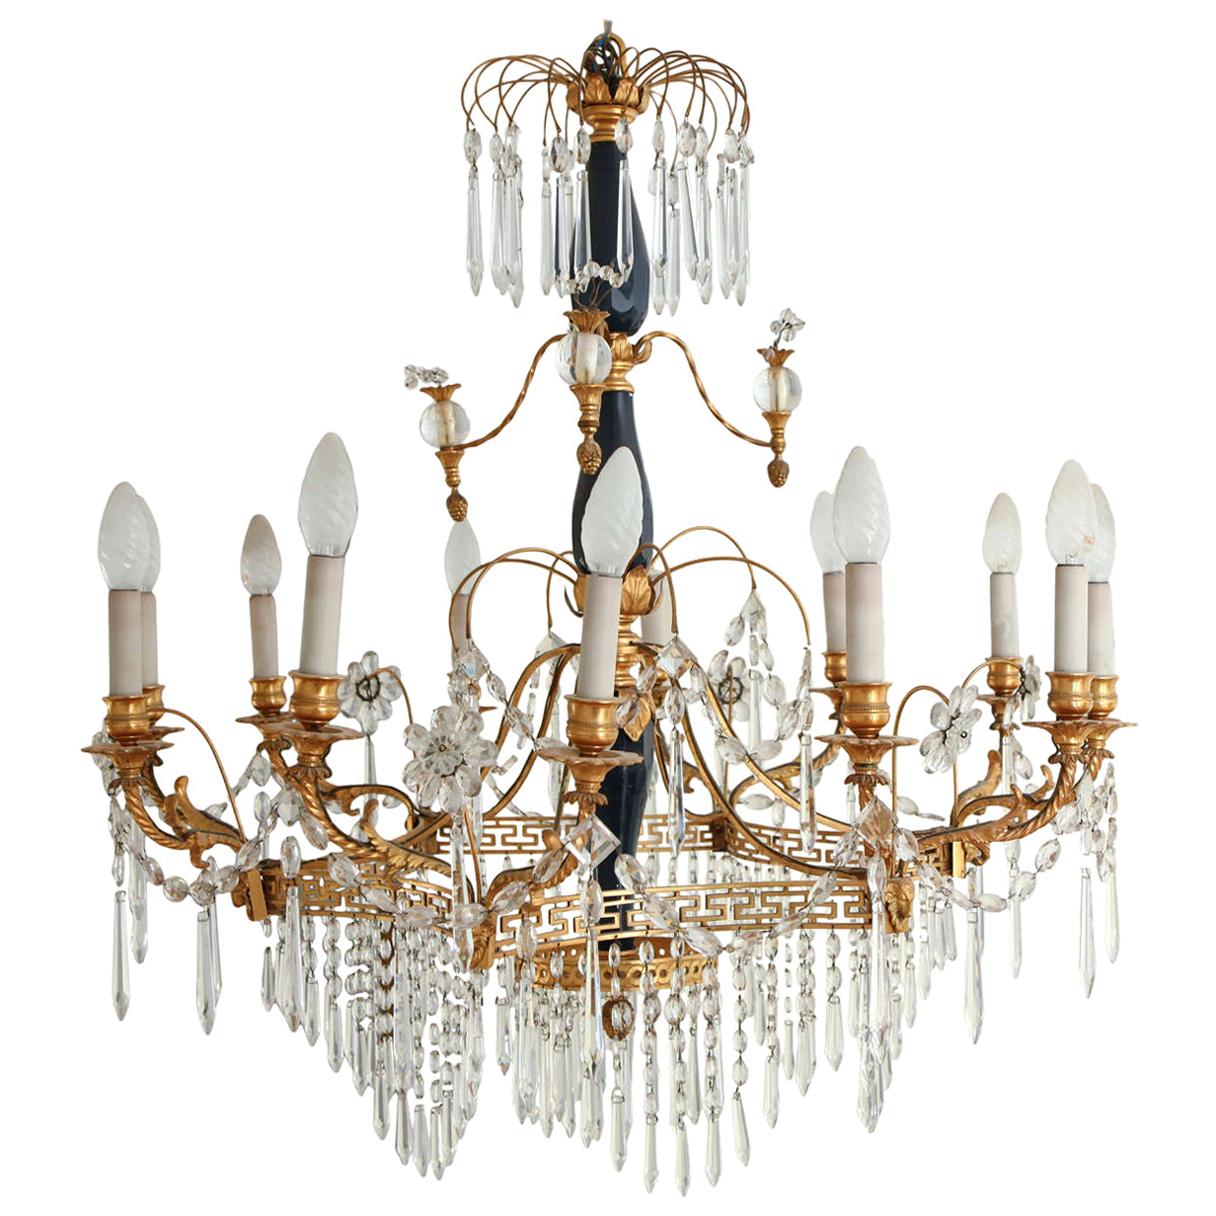 Elegant 19th Century Neoclassical Baltic Crystal and Gilt Bronze Chandelier